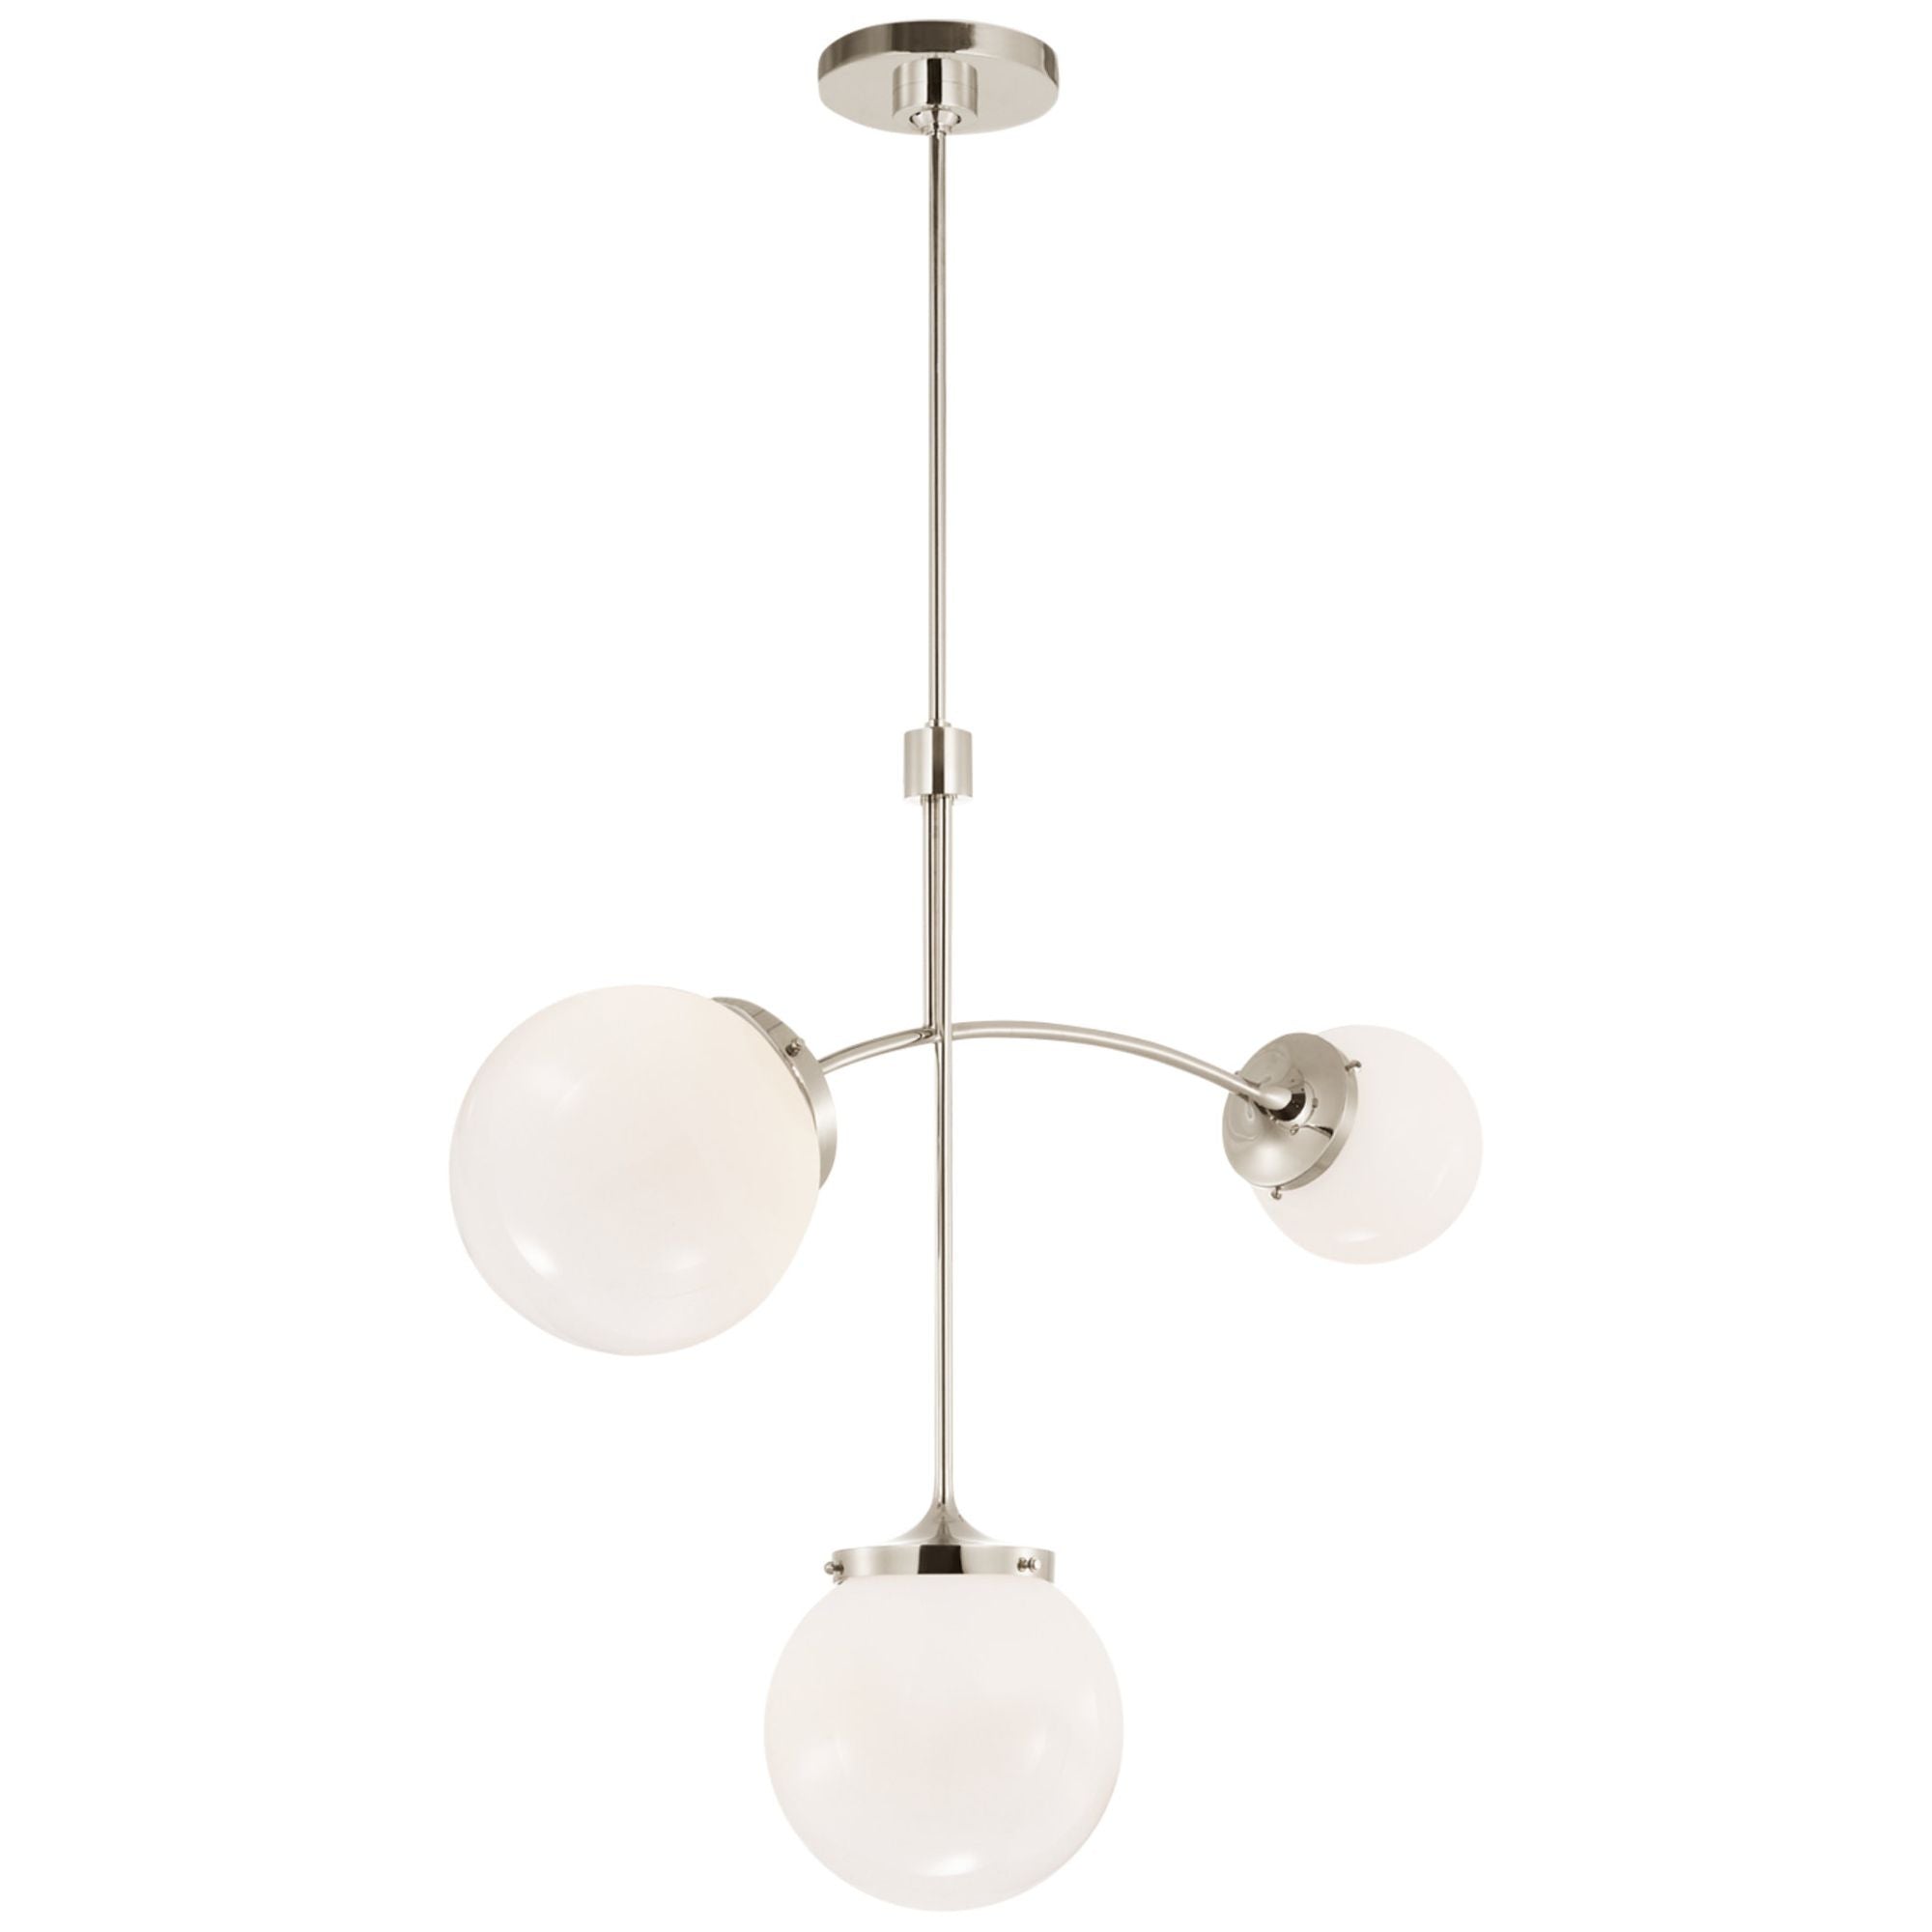 kate spade new york Prescott Small Chandelier in Polished Nickel with White Glass